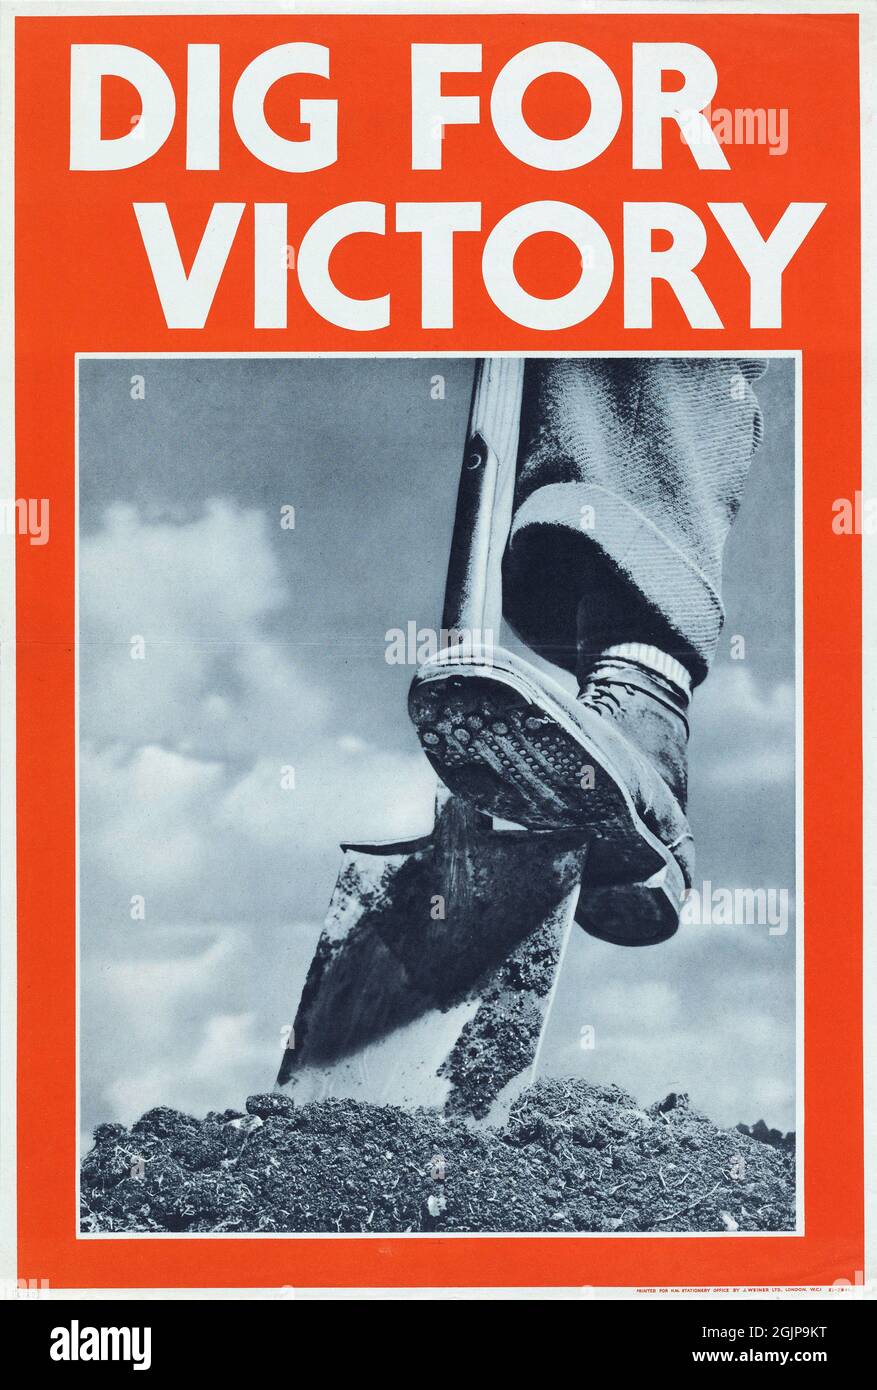 Dig for Victory", WWII poster Stock Photo